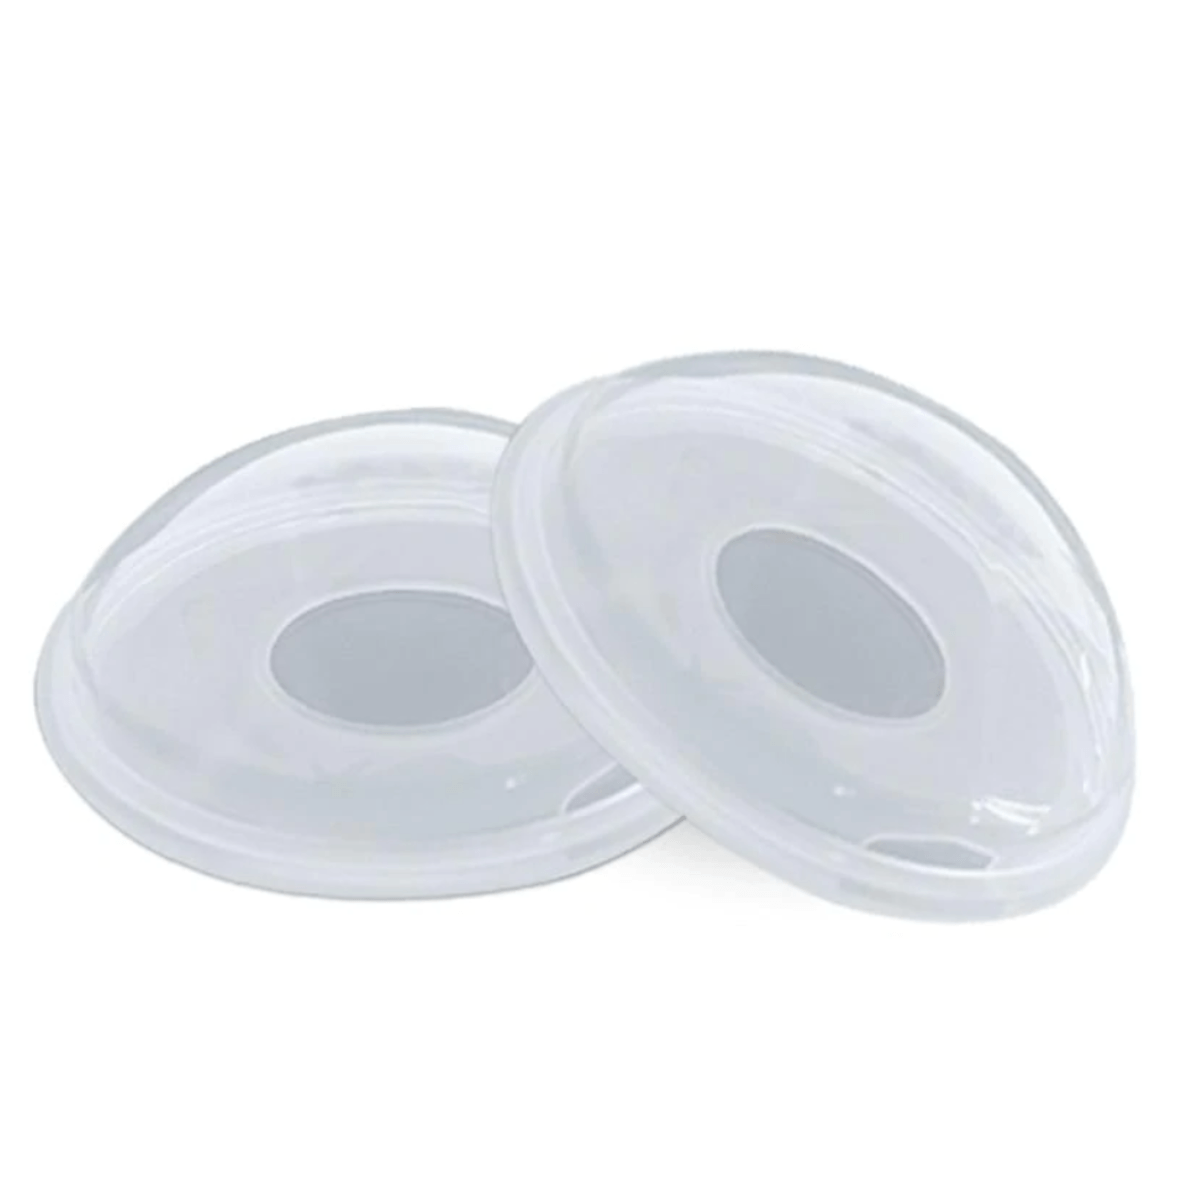 2 Pc Silicone Breast Milk Collector Cup with Milk Bags